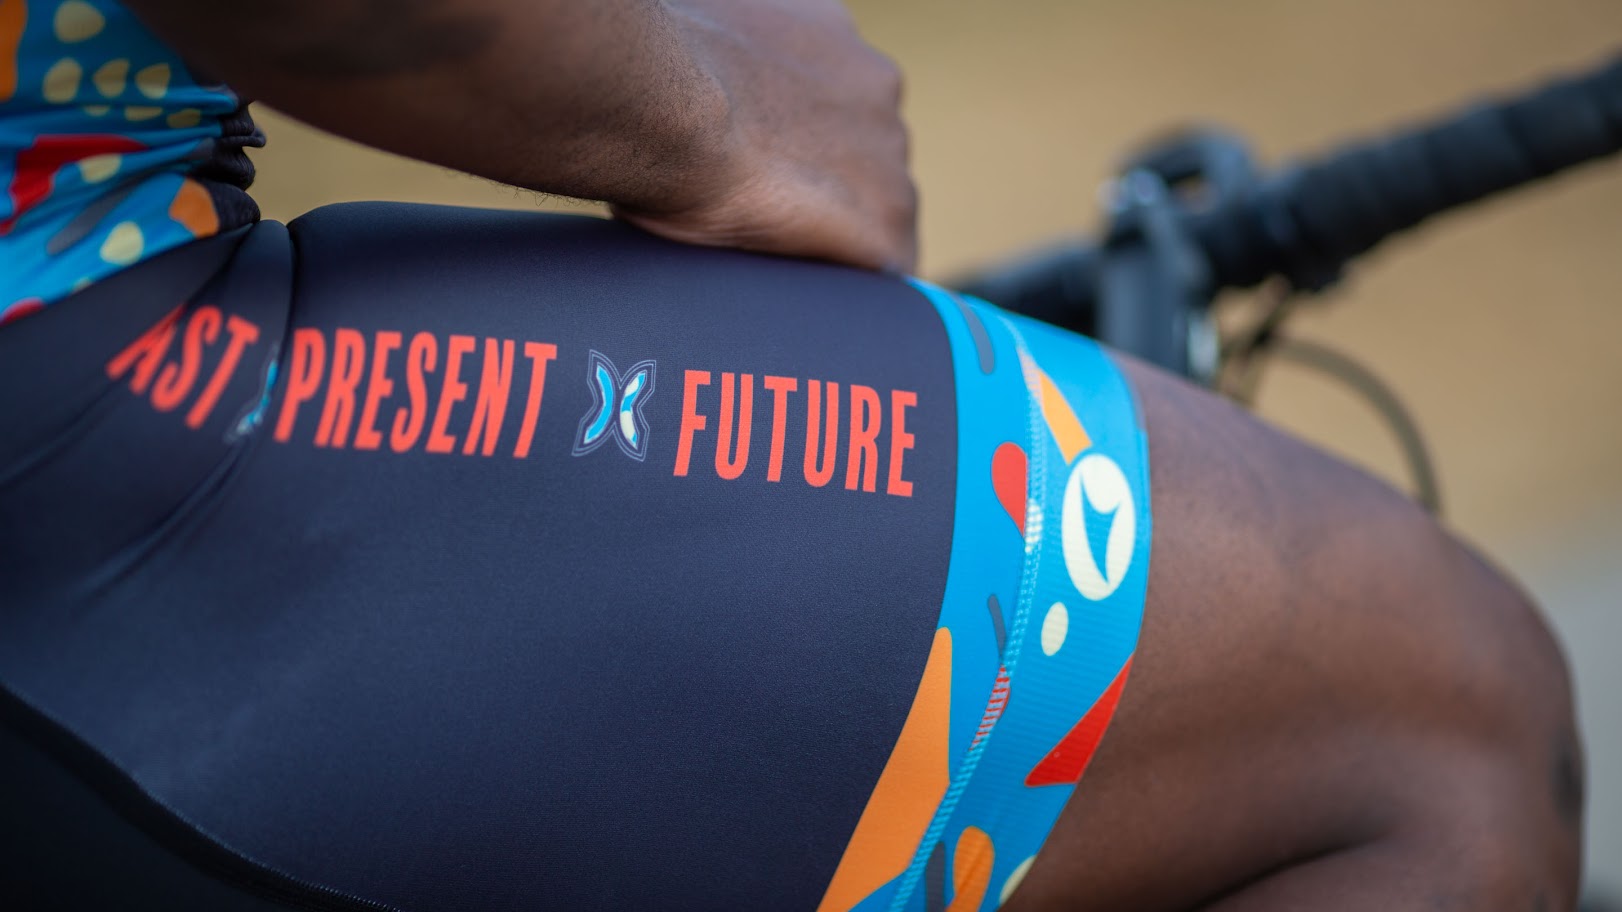 Bib Shorts - adelaidebifolddoors x Major Taylor Iron Riders - A collection of cycling clothing celebrating Black History Month - Past, Present and Future